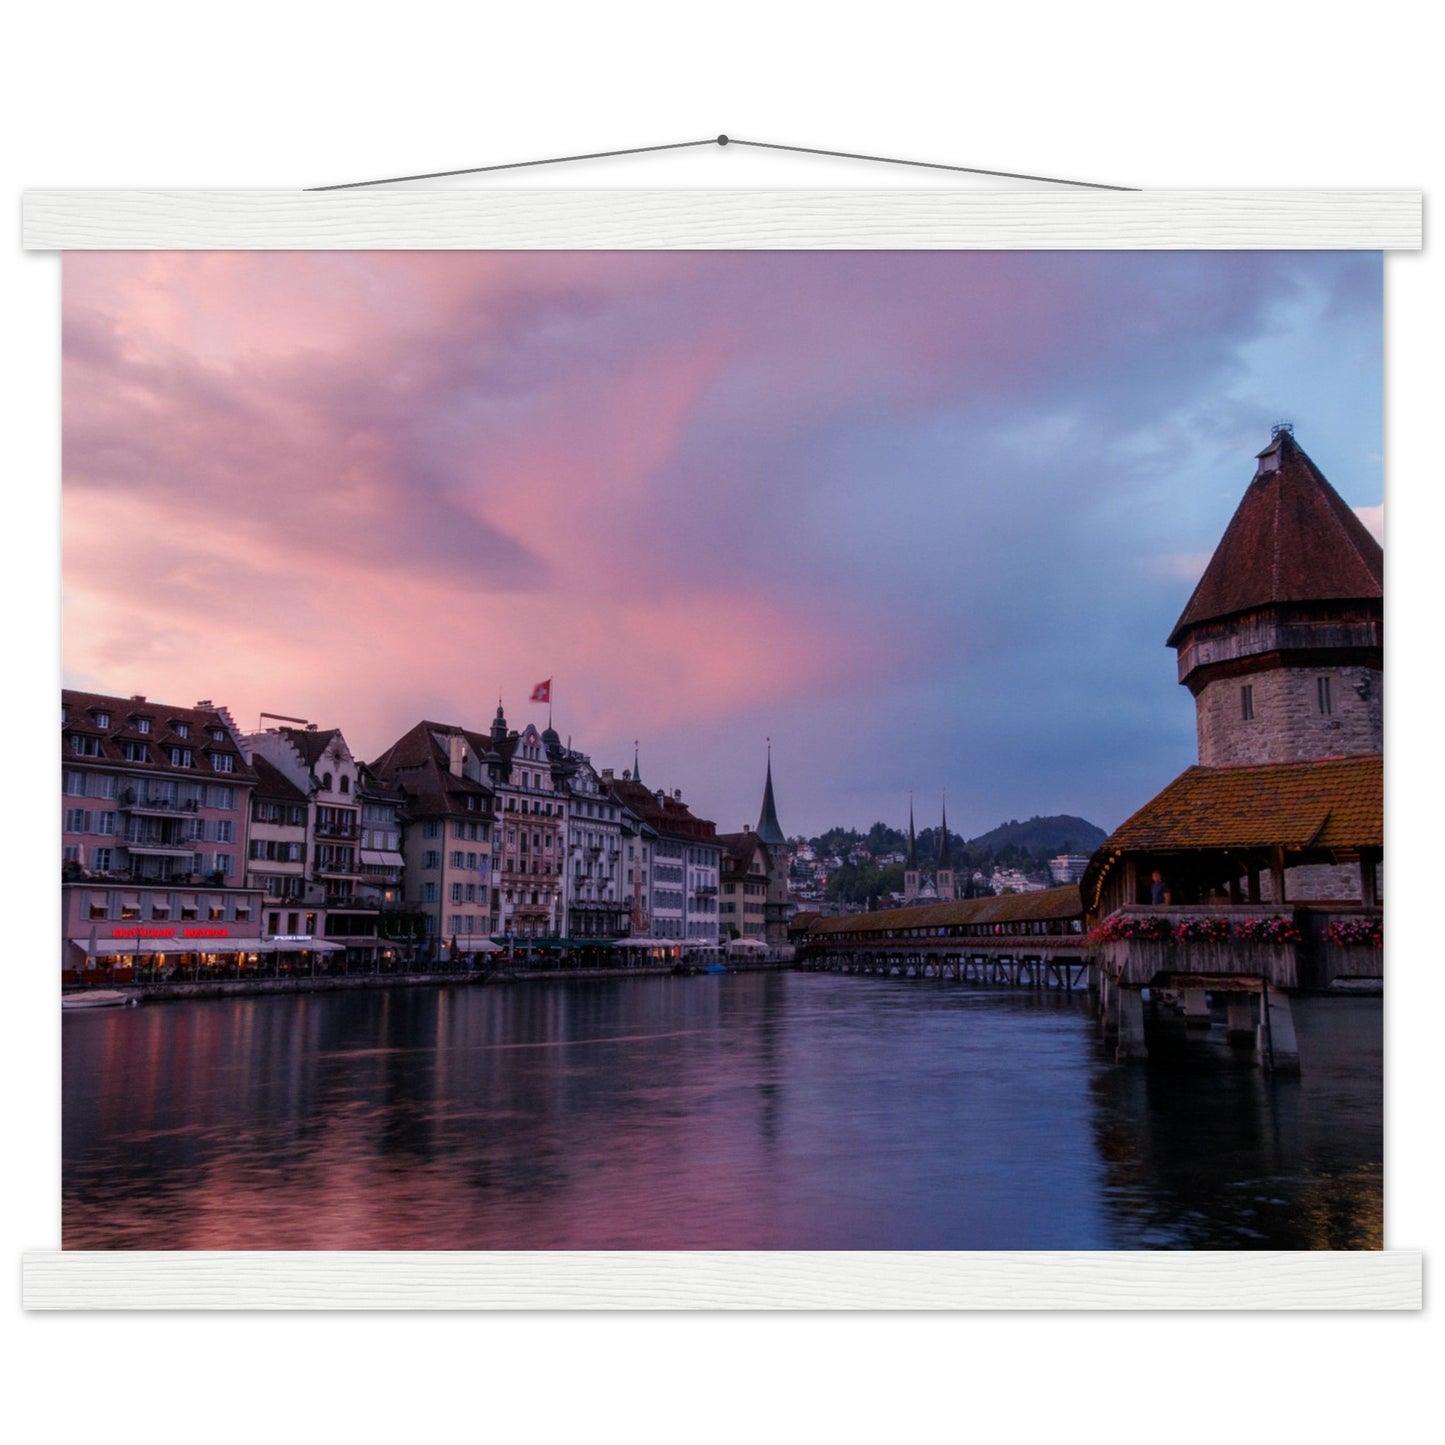 Idyllic sunset with Chapel Bridge, Lucerne - Premium poster with wooden bars